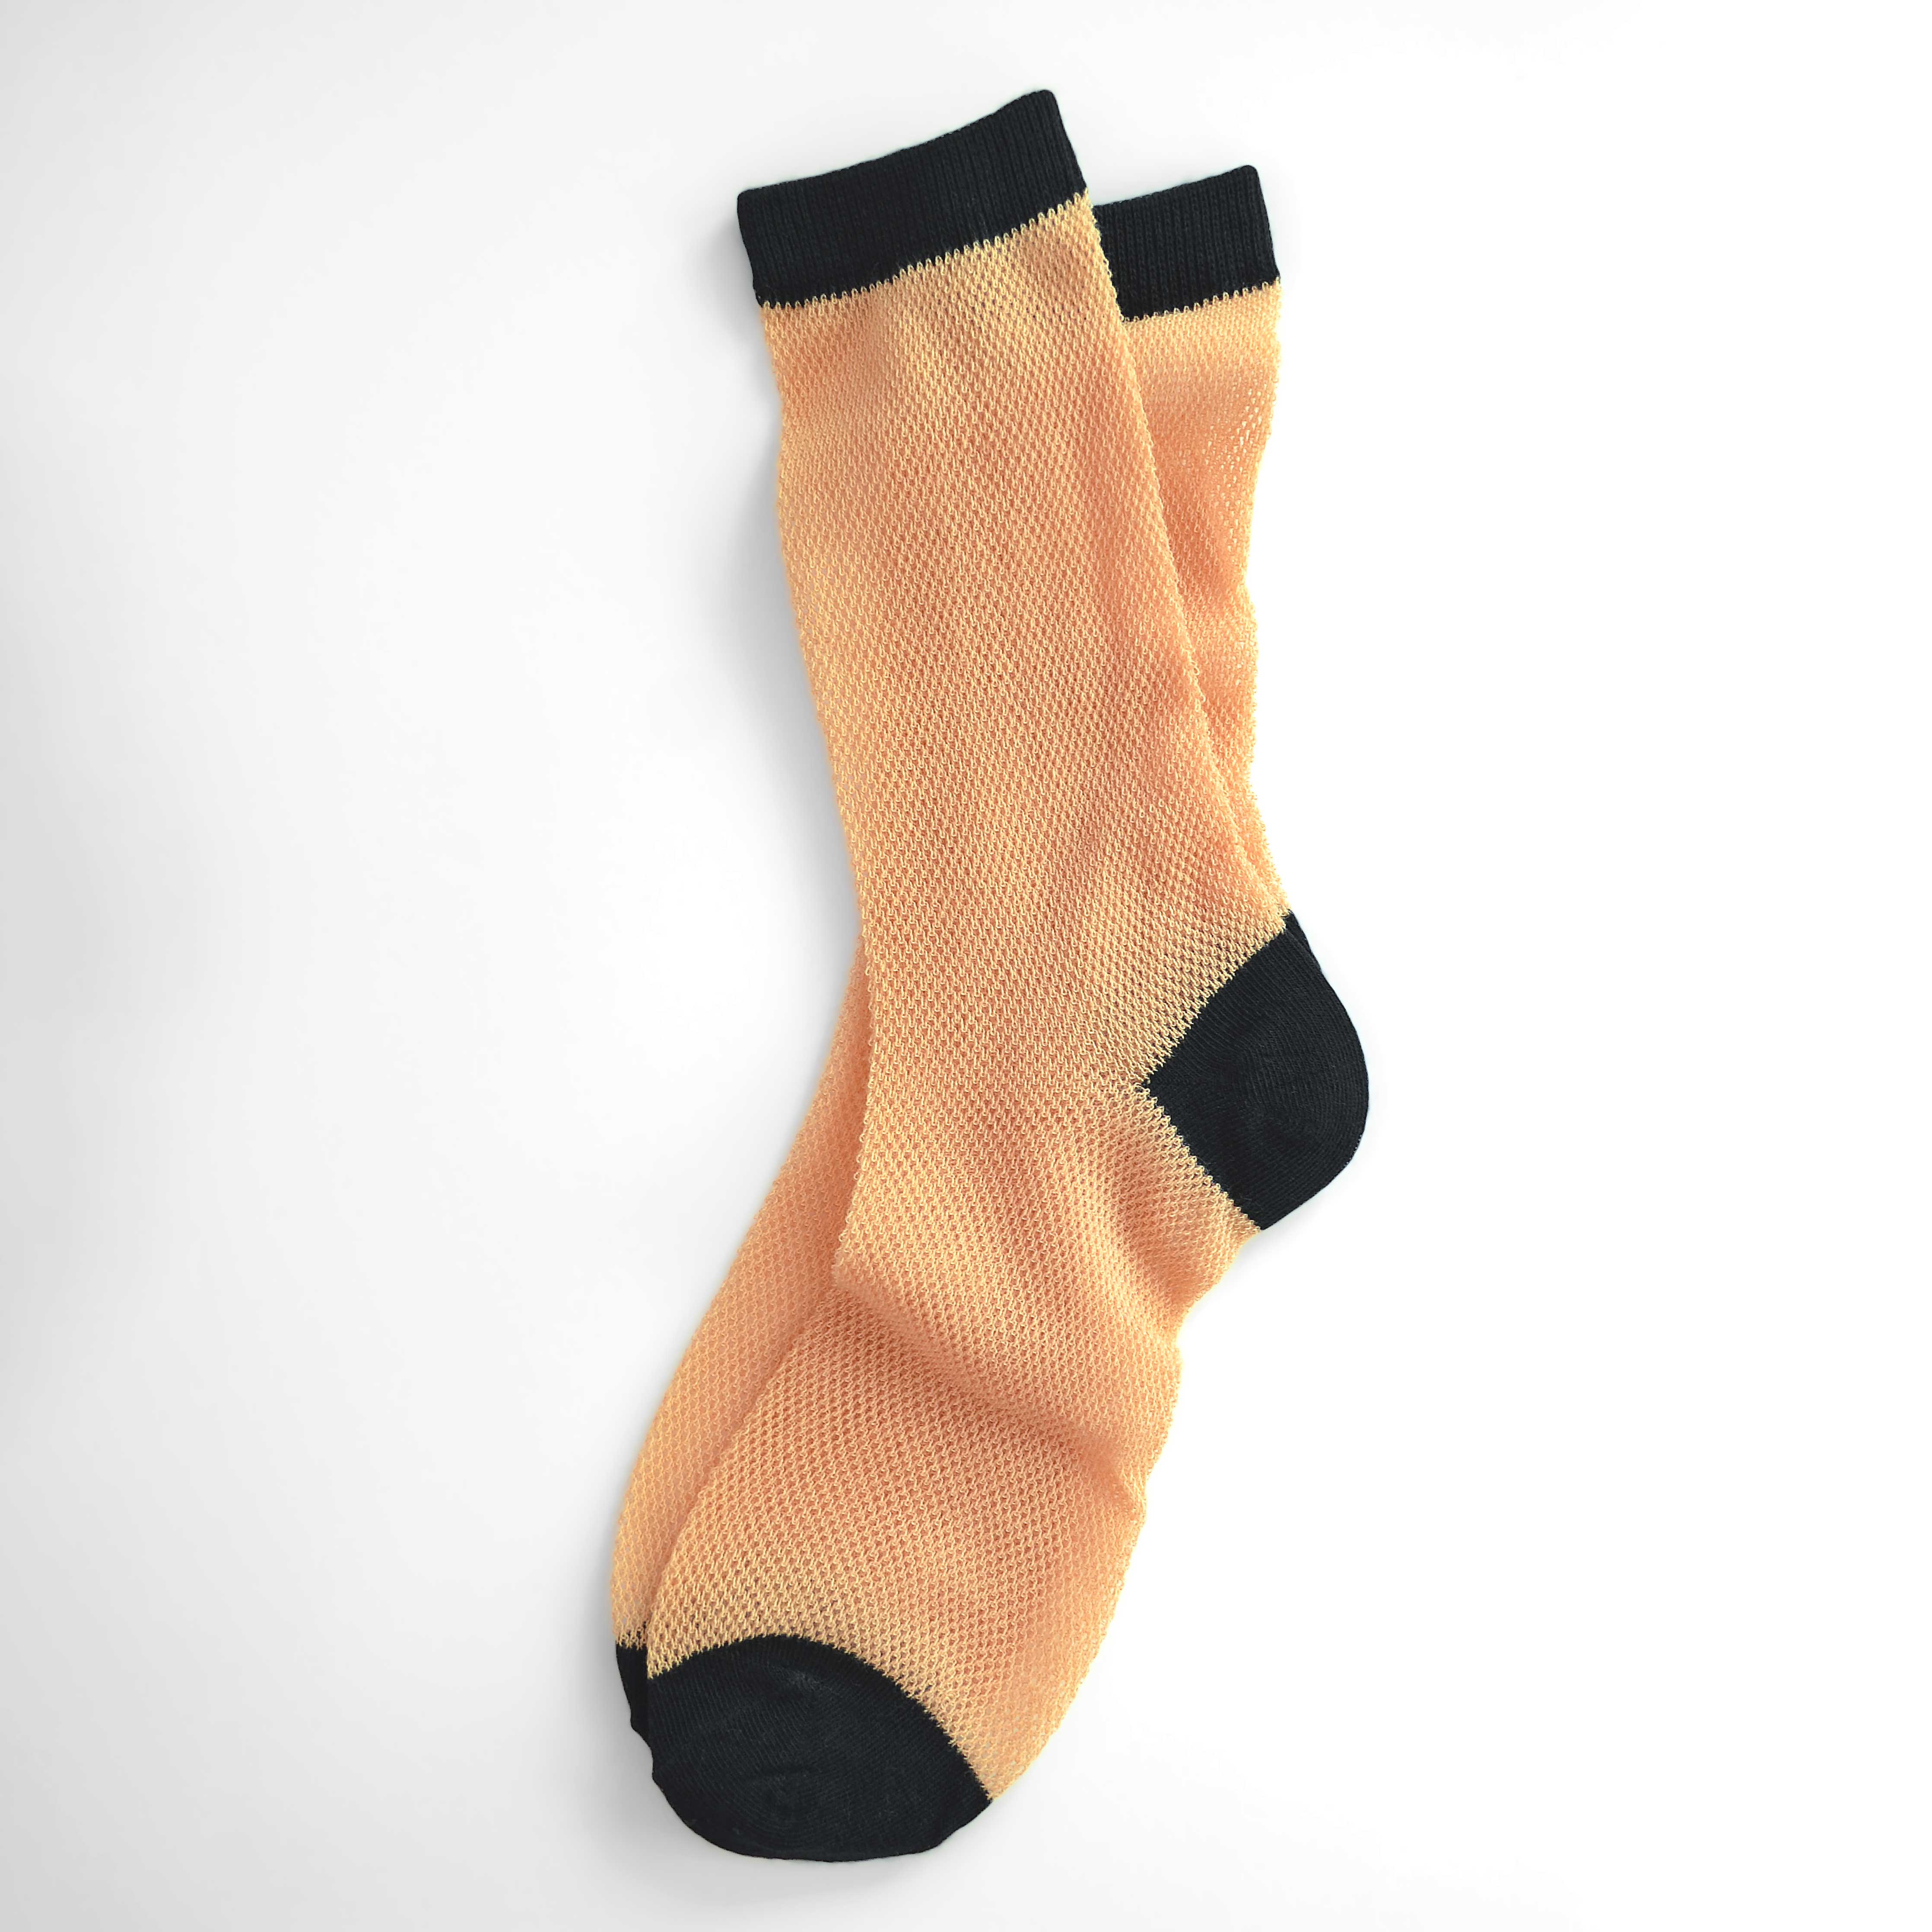 &#39;Valencia&#39; mid-crew socks, showcasing an open mesh sheer design in Cantaloupe, Pink, and Purple, effortlessly blending breathability and chic style. Size: Small (US women’s shoe size: 4-8).